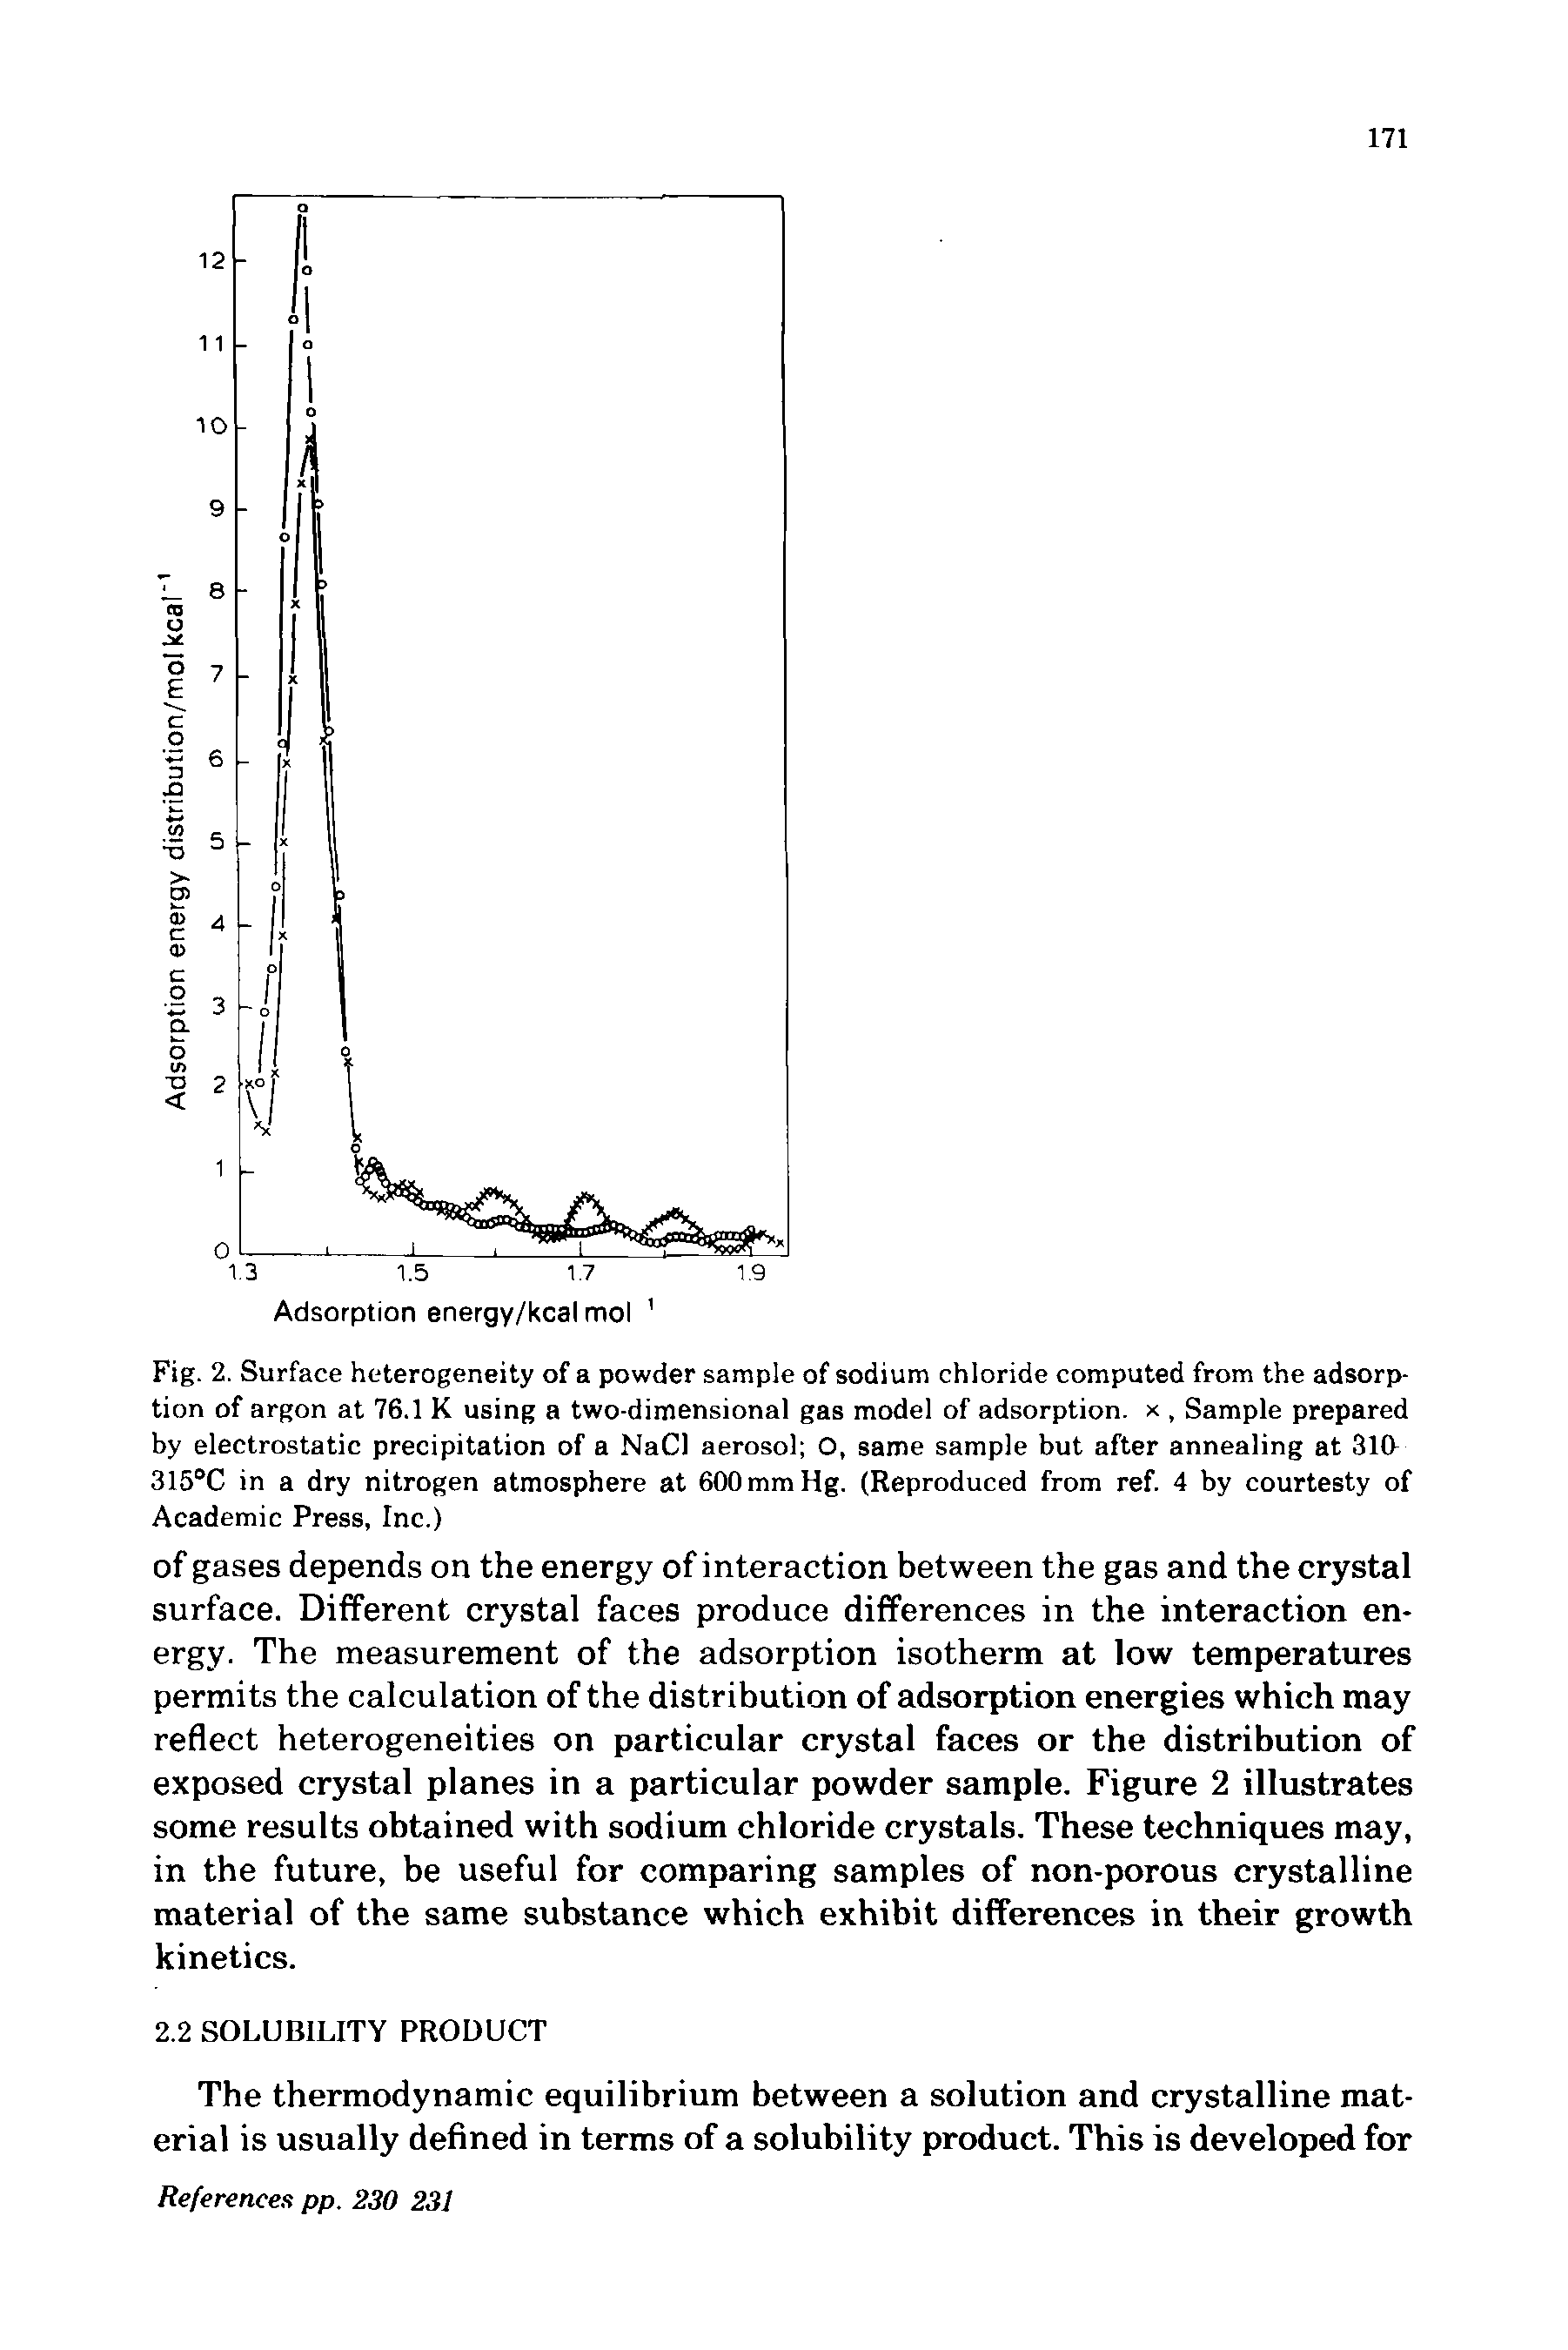 Fig. 2. Surface heterogeneity of a powder sample of sodium chloride computed from the adsorption of argon at 76.1 K using a two-dimensional gas model of adsorption, x, Sample prepared by electrostatic precipitation of a NaCl aerosol O, same sample but after annealing at 31(1 315°C in a dry nitrogen atmosphere at 600mmHg. (Reproduced from ref. 4 by courtesty of Academic Press, Inc.)...